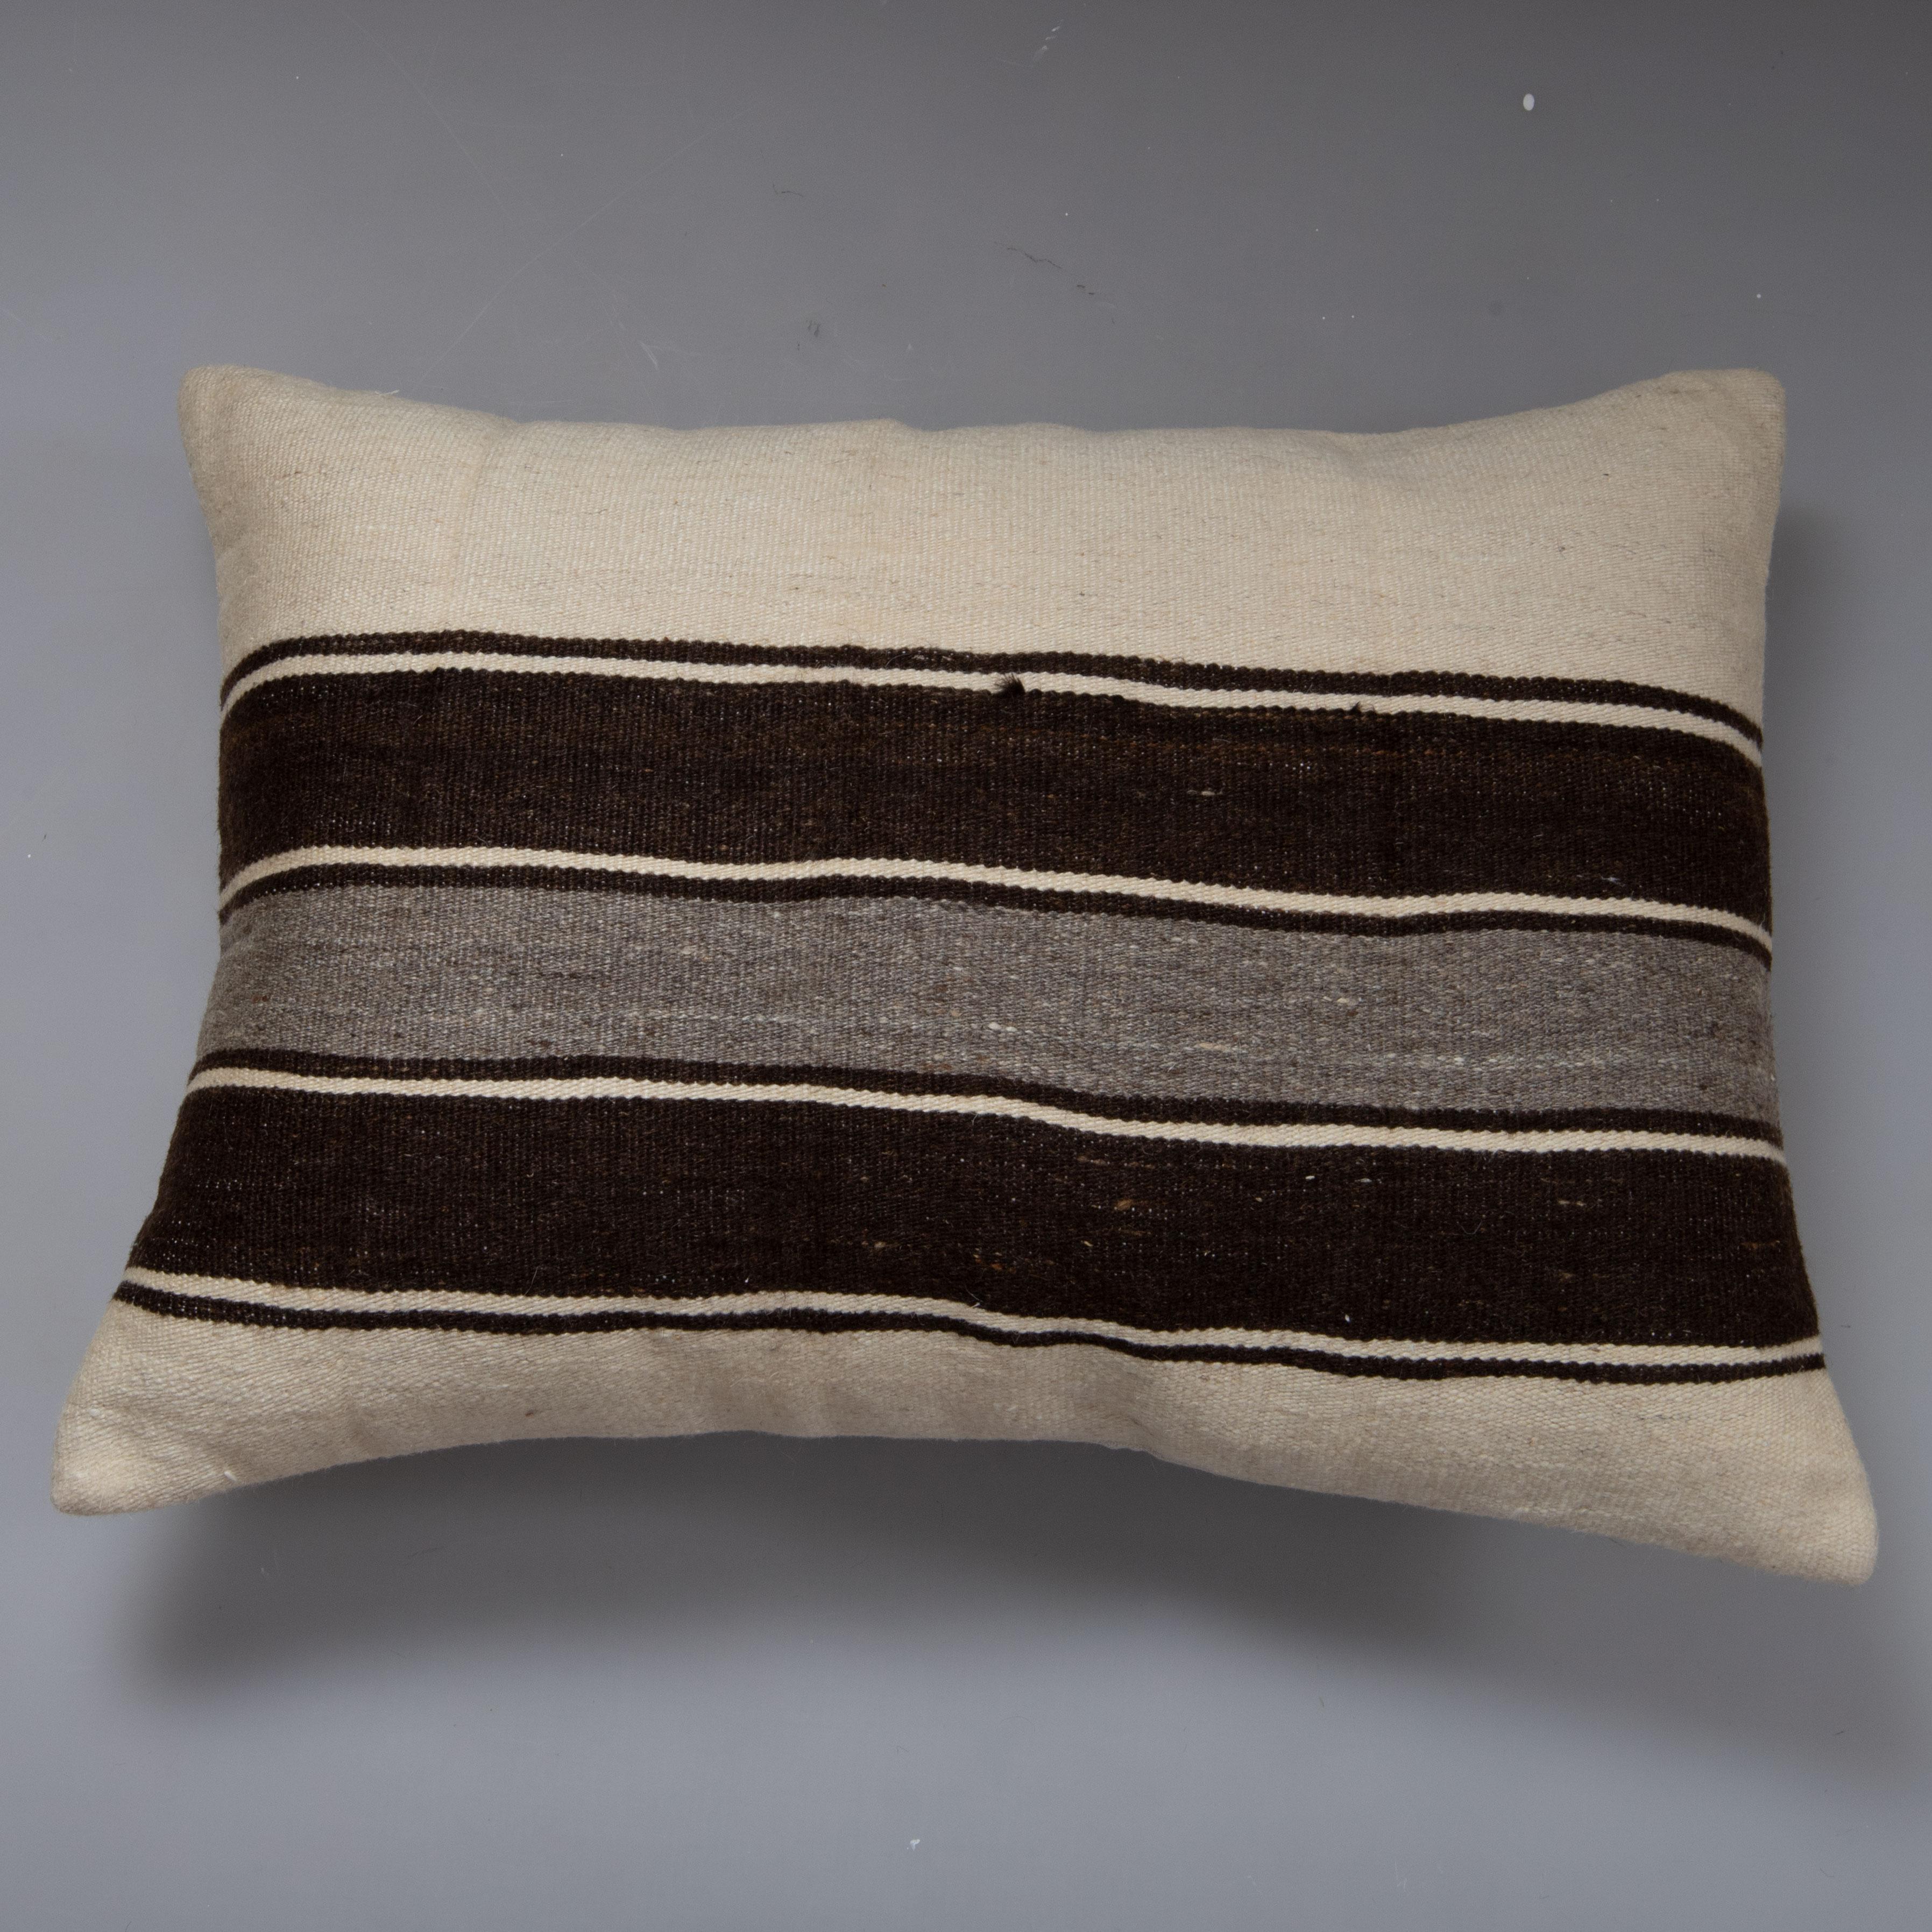 Angora/ Mohair Siirt Blanket Pillow Cover, 1960s/70s For Sale 1